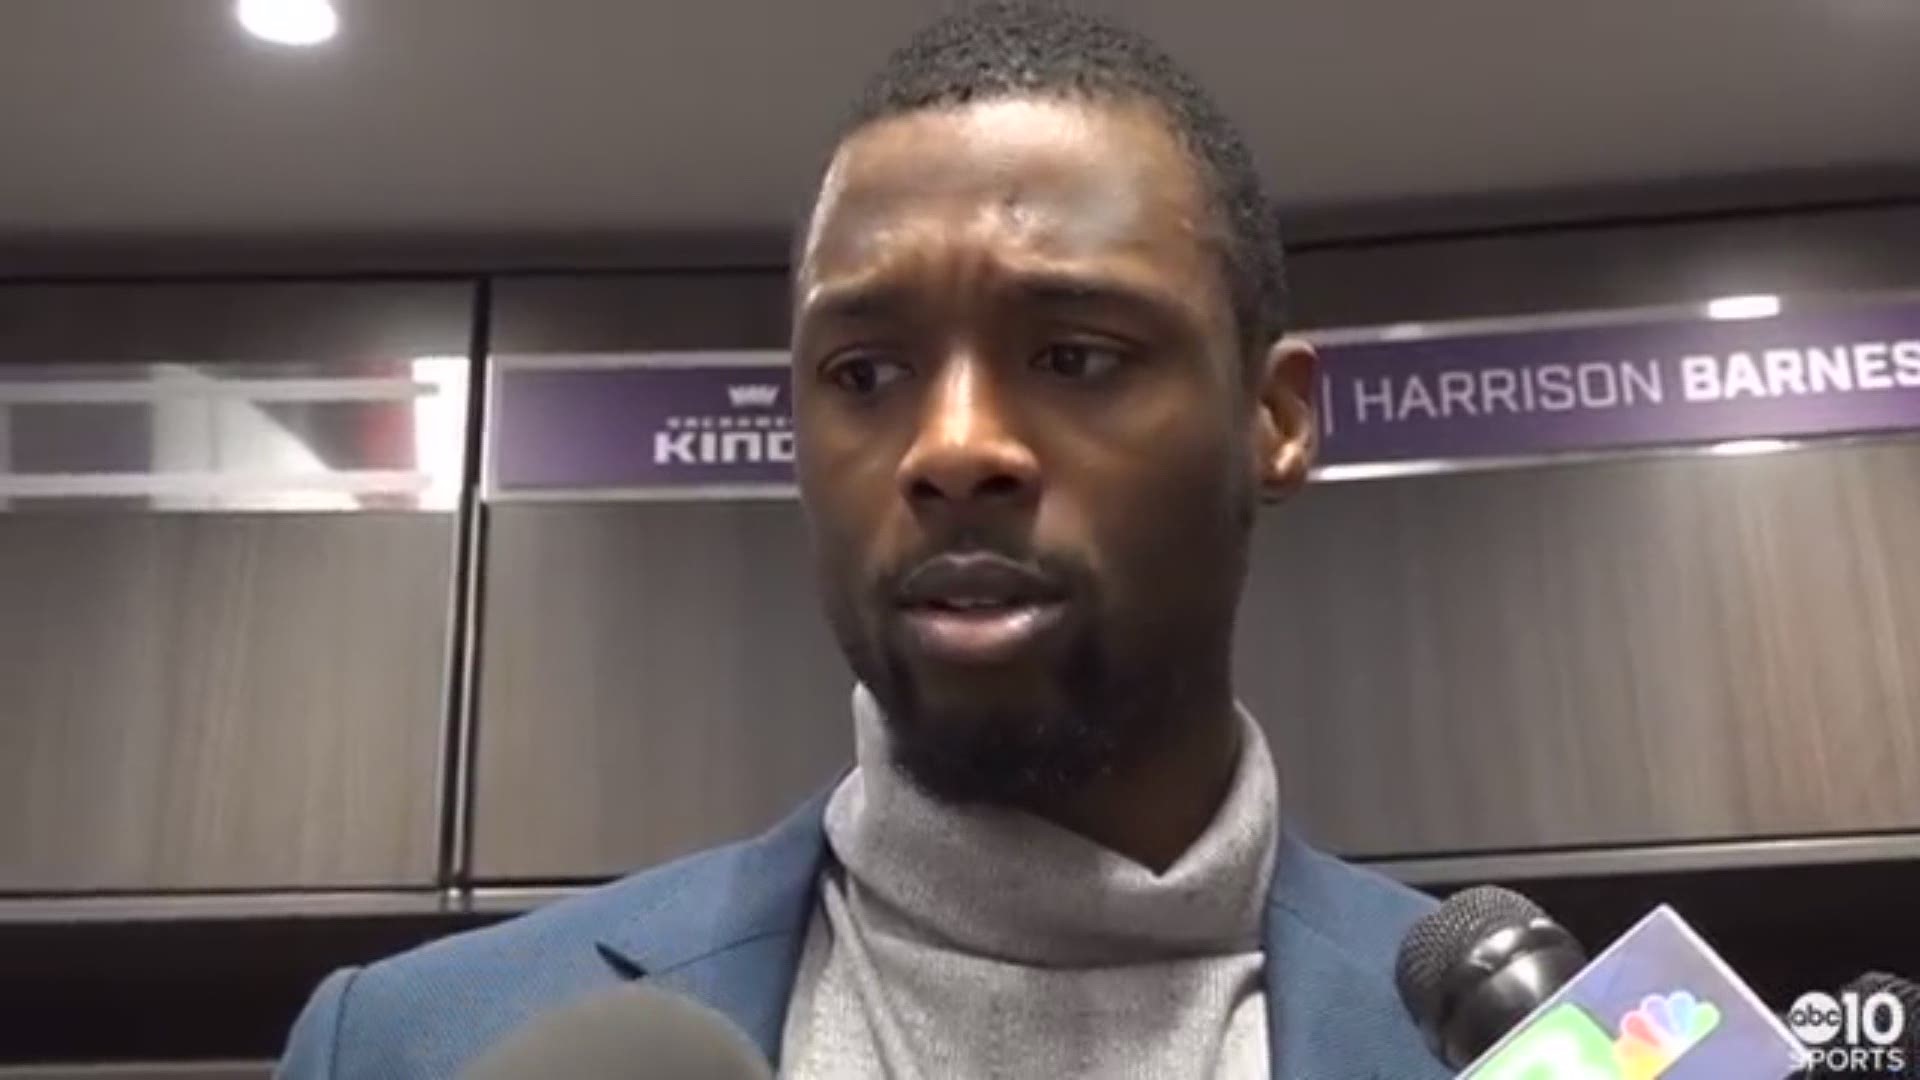 Harrison Barnes talks about his team's final possession, where his shot sailed wide to ensure the Celtics a 111-109 over his Kings team. Barnes talks about the playoff chances for Sacramento now being four games outside the Western Conference's final playoff spot, as well as the upcoming four-game road trip.